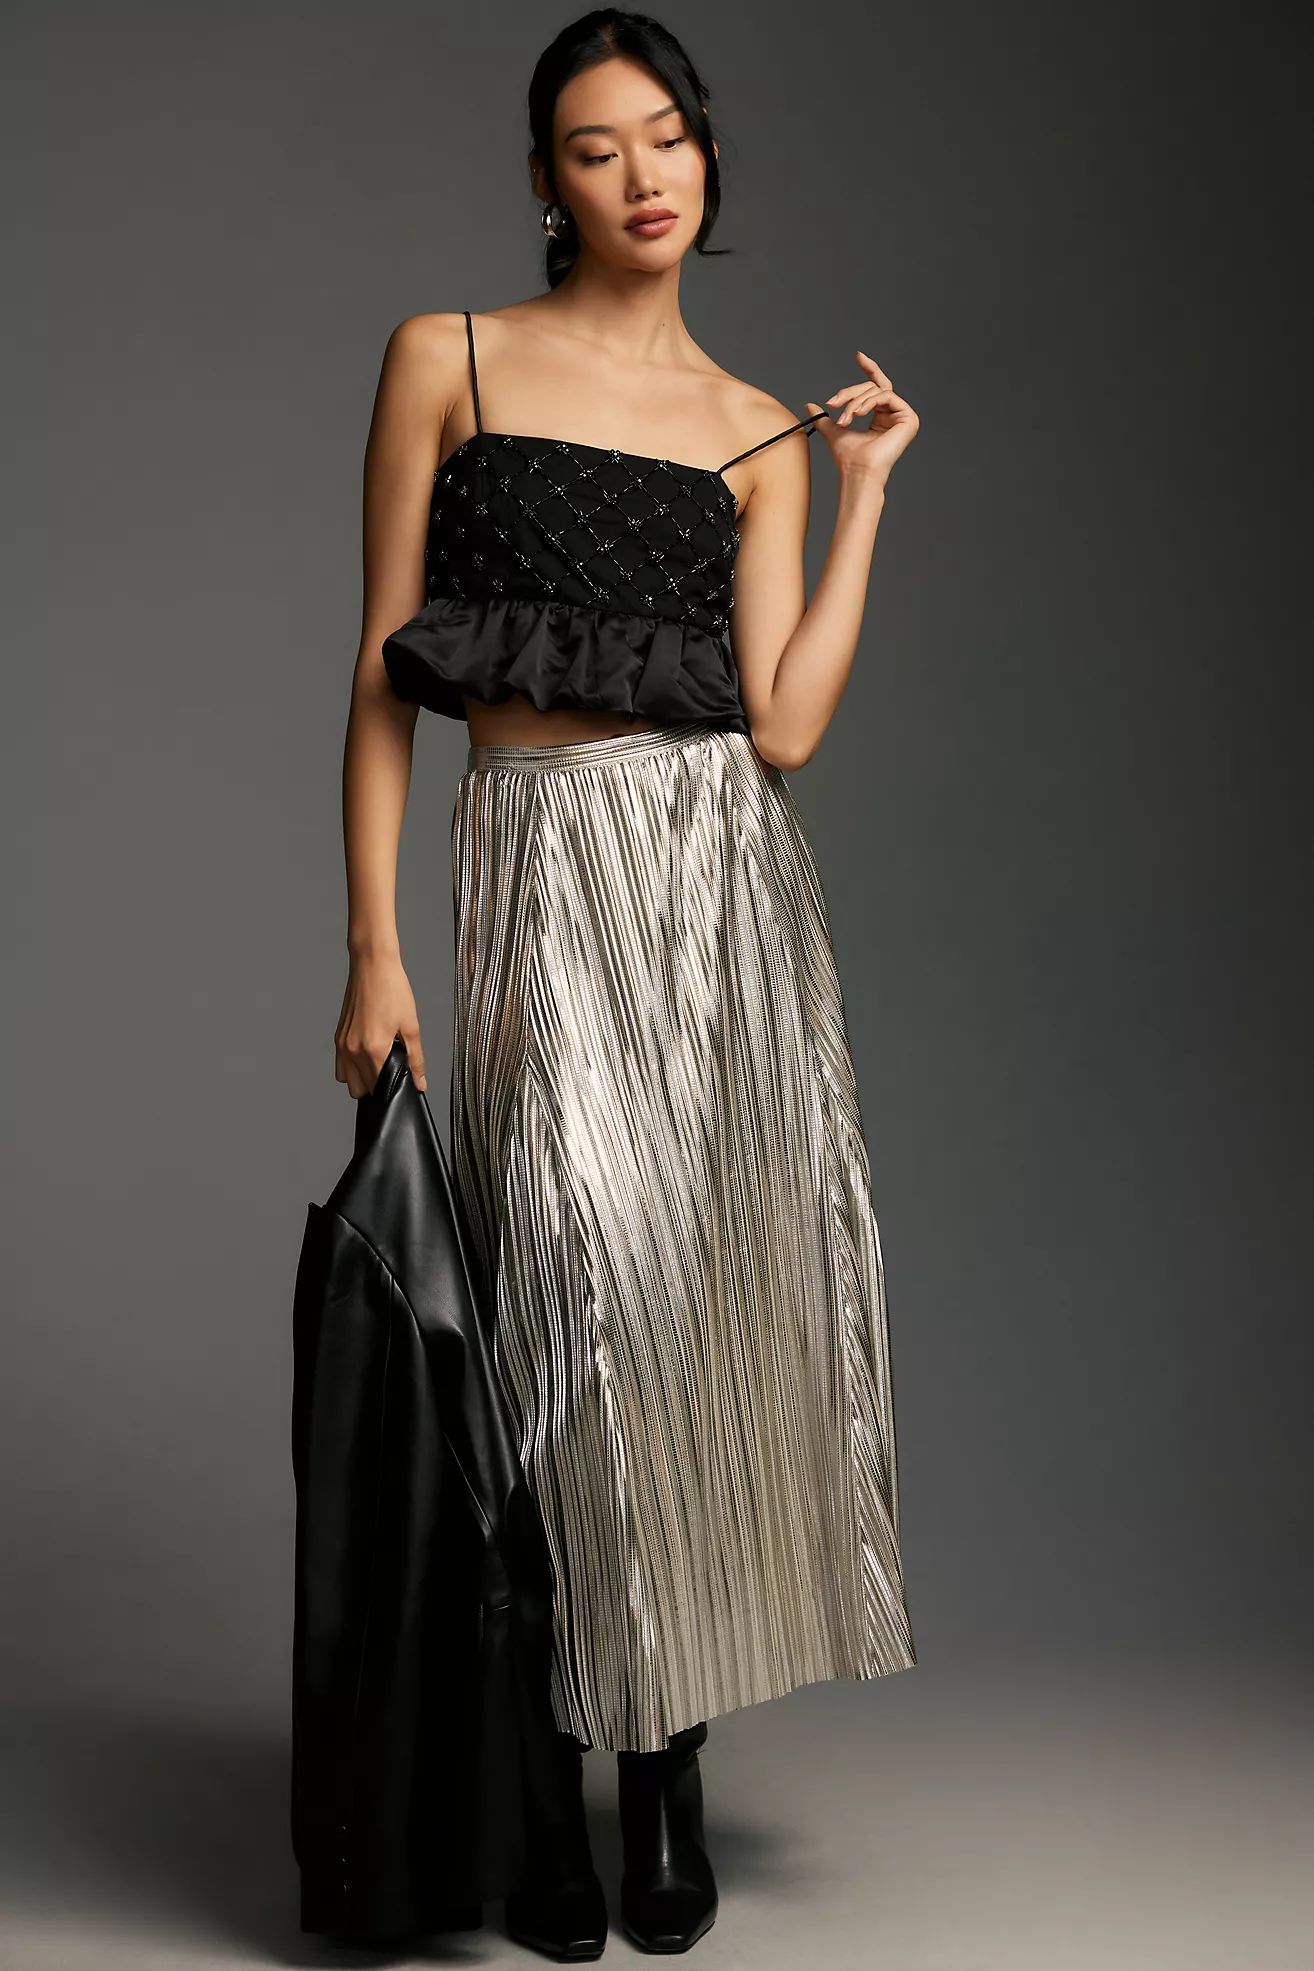 By Anthropologie Pleated Metallic Skirt | Anthropologie (US)